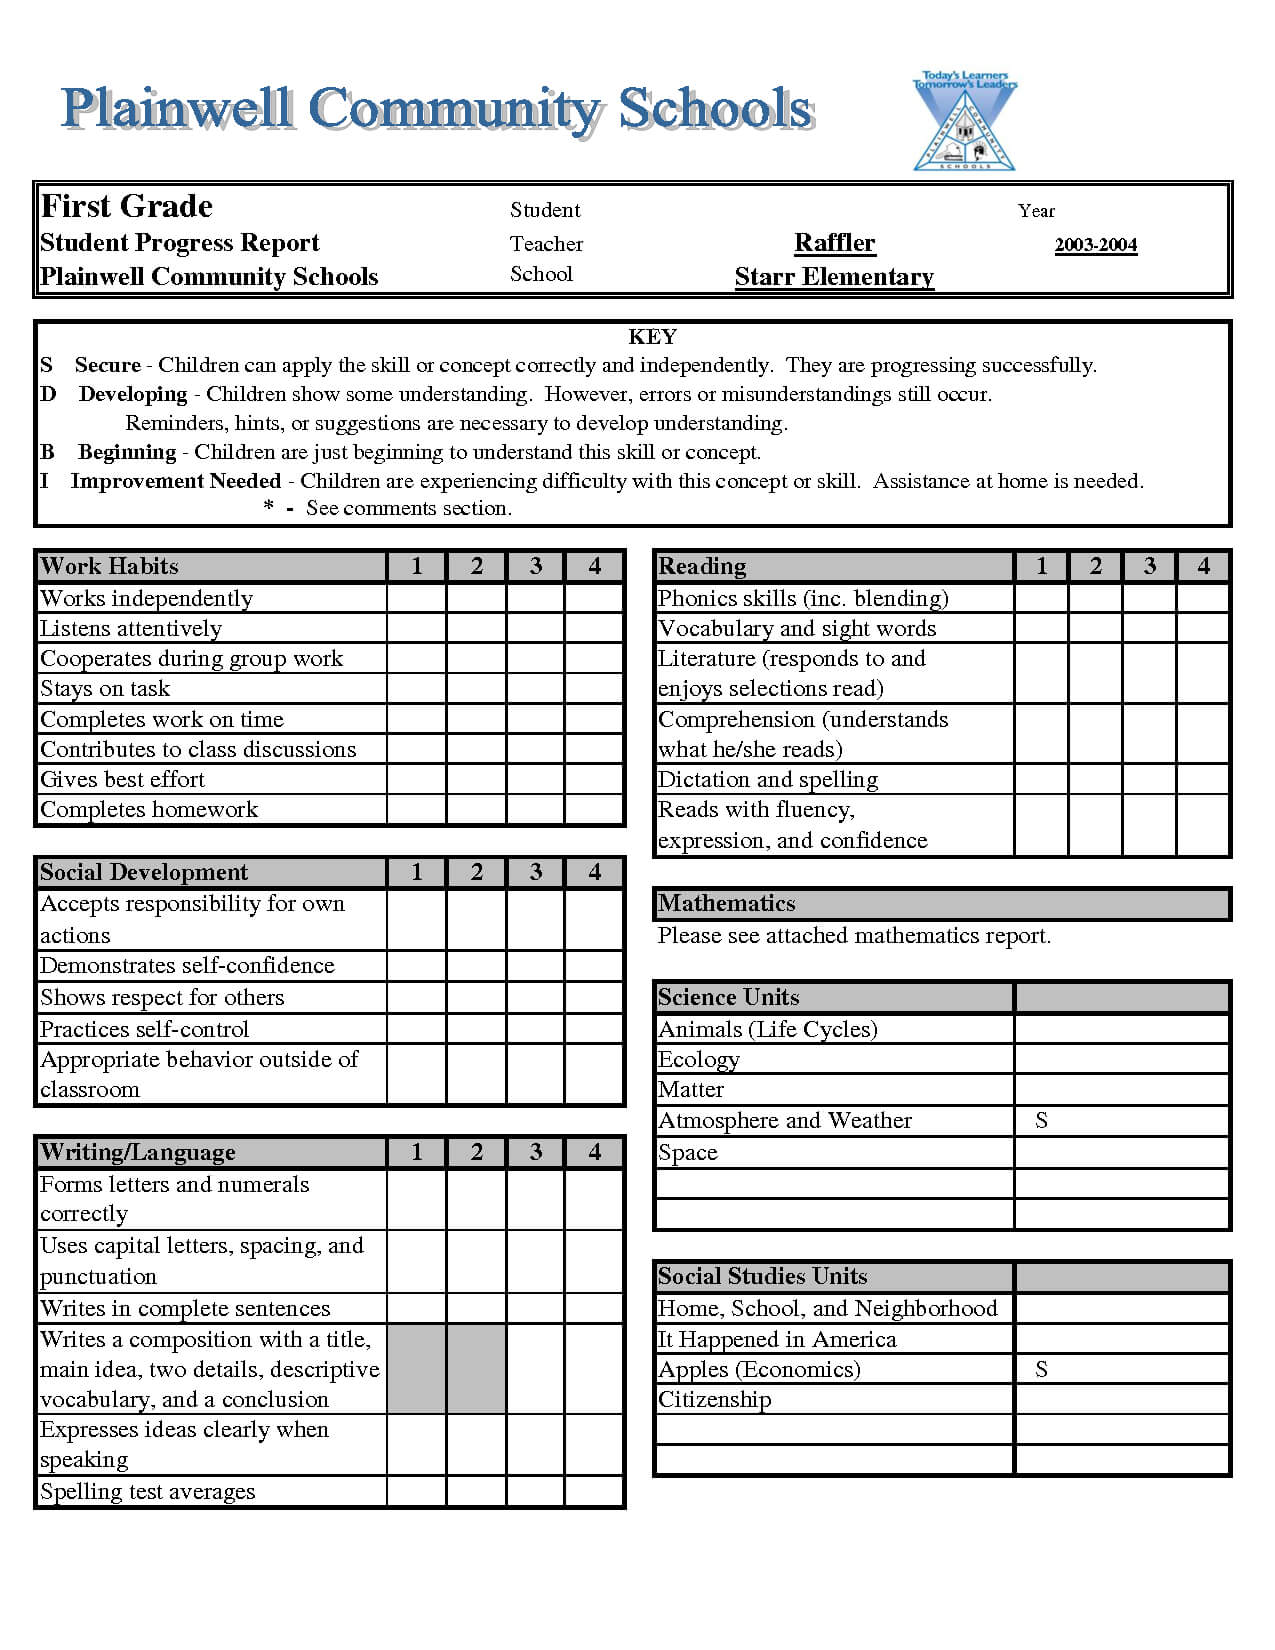 Report Card Template - Excel.xls Download Legal Documents With Regard To Character Report Card Template